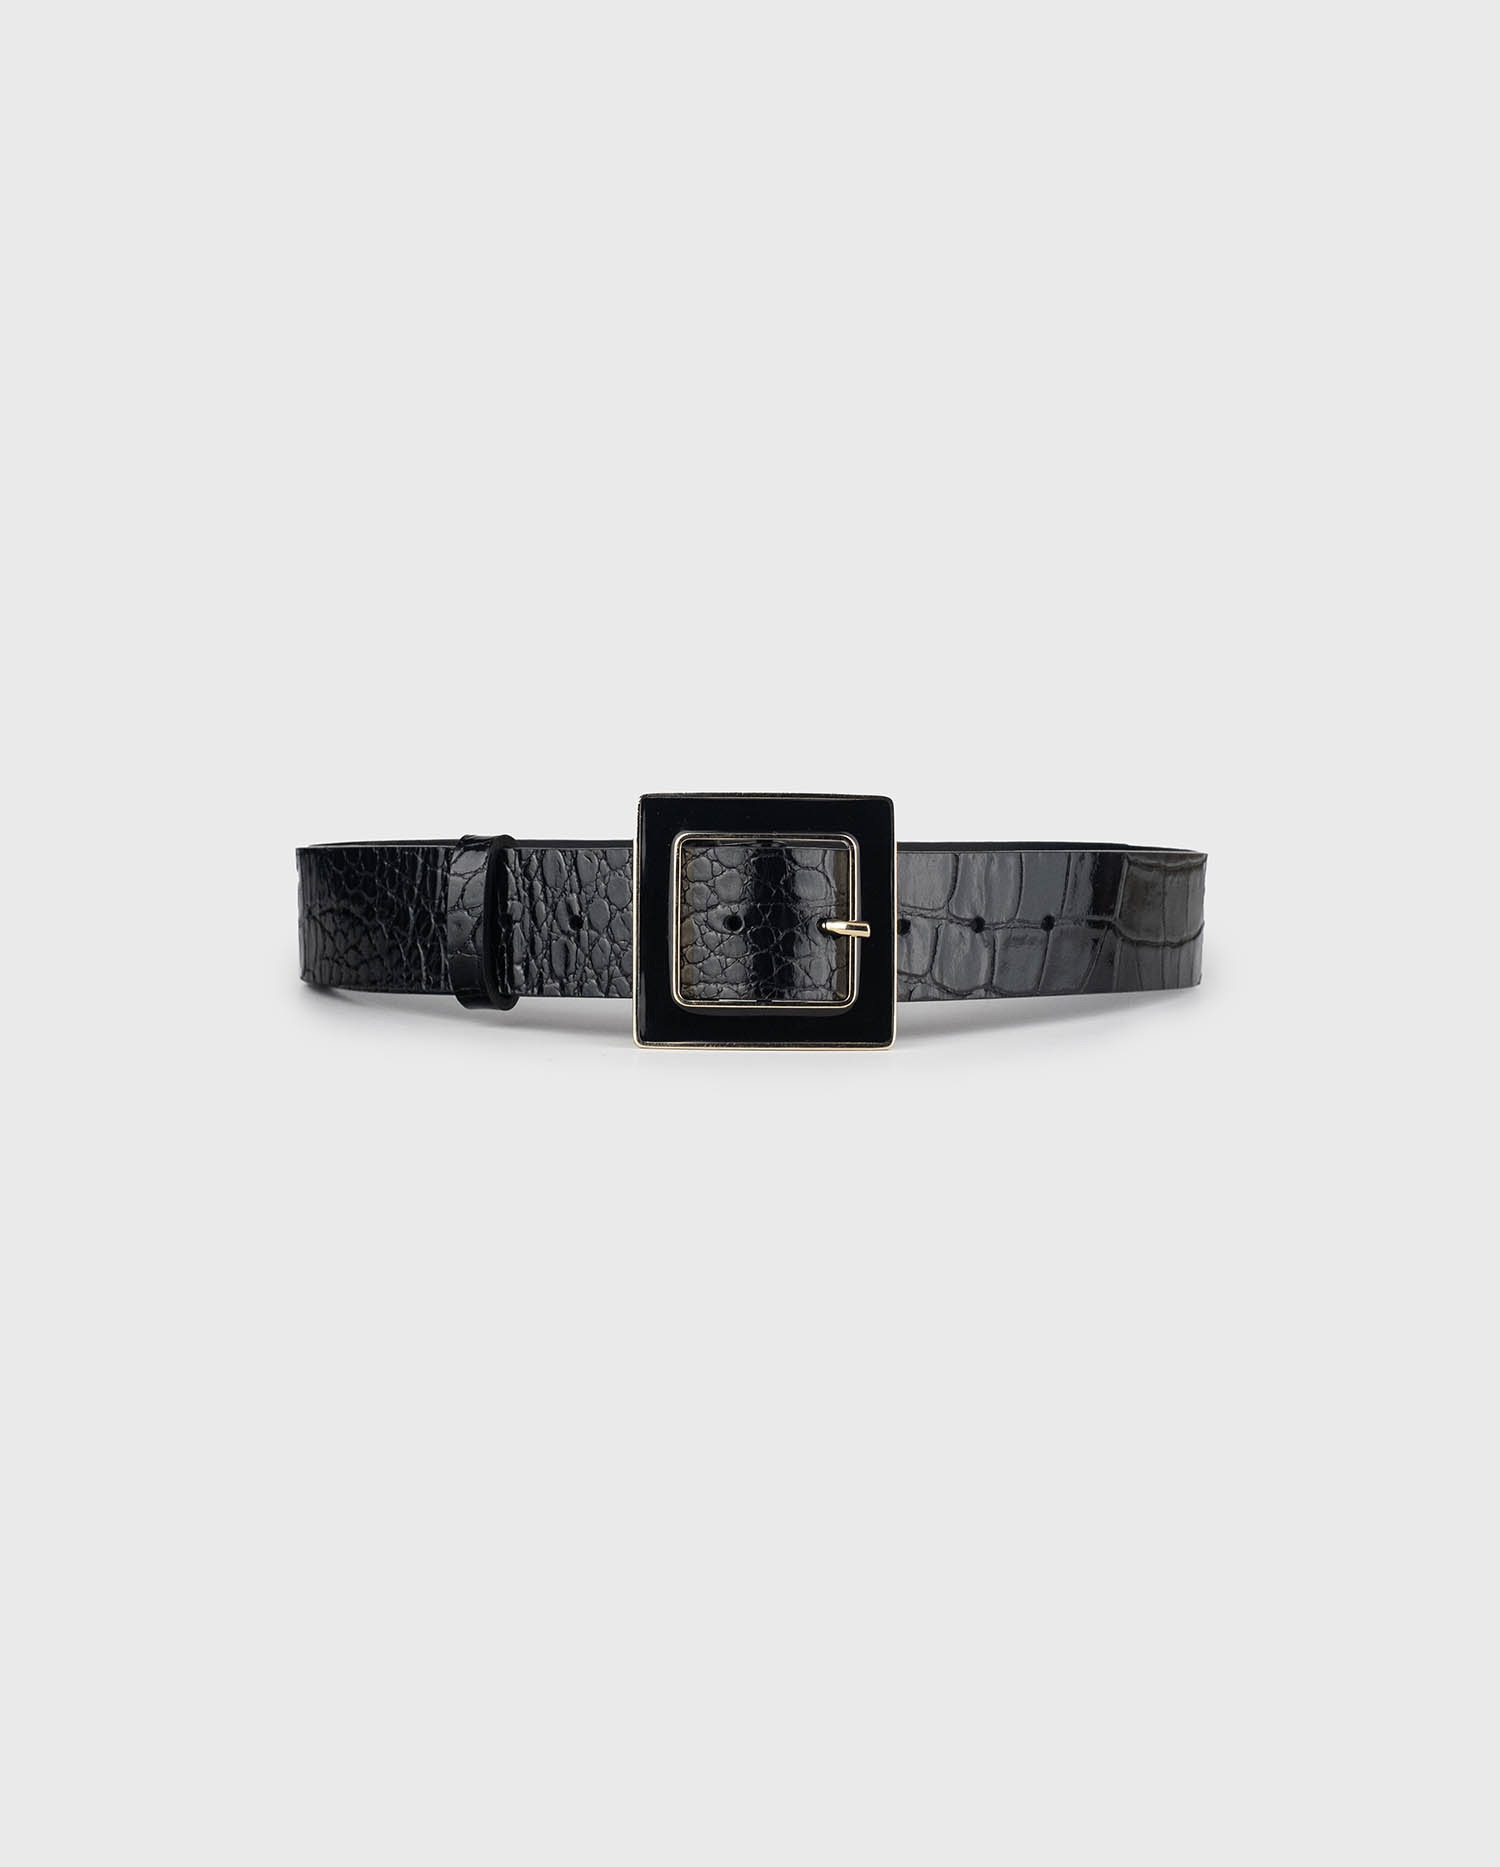 Discover the NORTH croc-embossed leather belt from ANNE FONTAINE